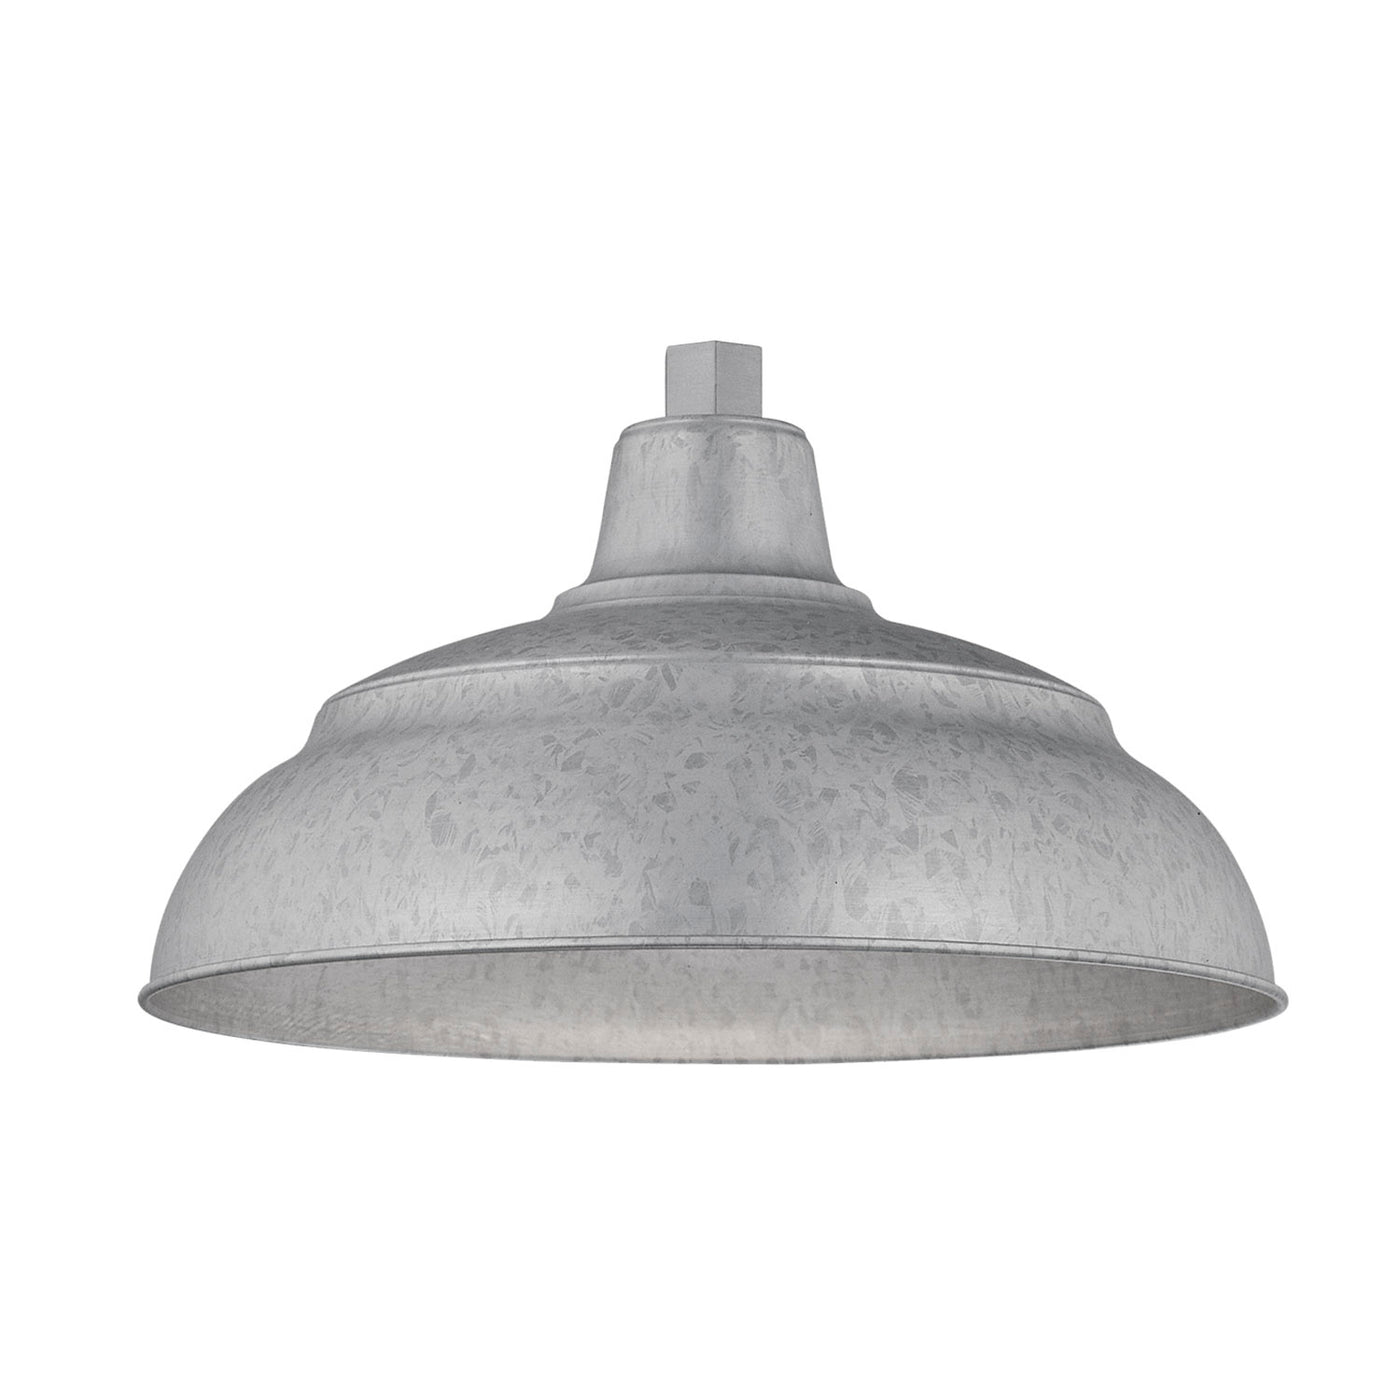 Millennium Lighting 14" RLM Warehouse Shade With Selected Goose Neck Mount and Wire Guard (Available in Bronze, Galvanized, Black, Red, and Green Finishes)